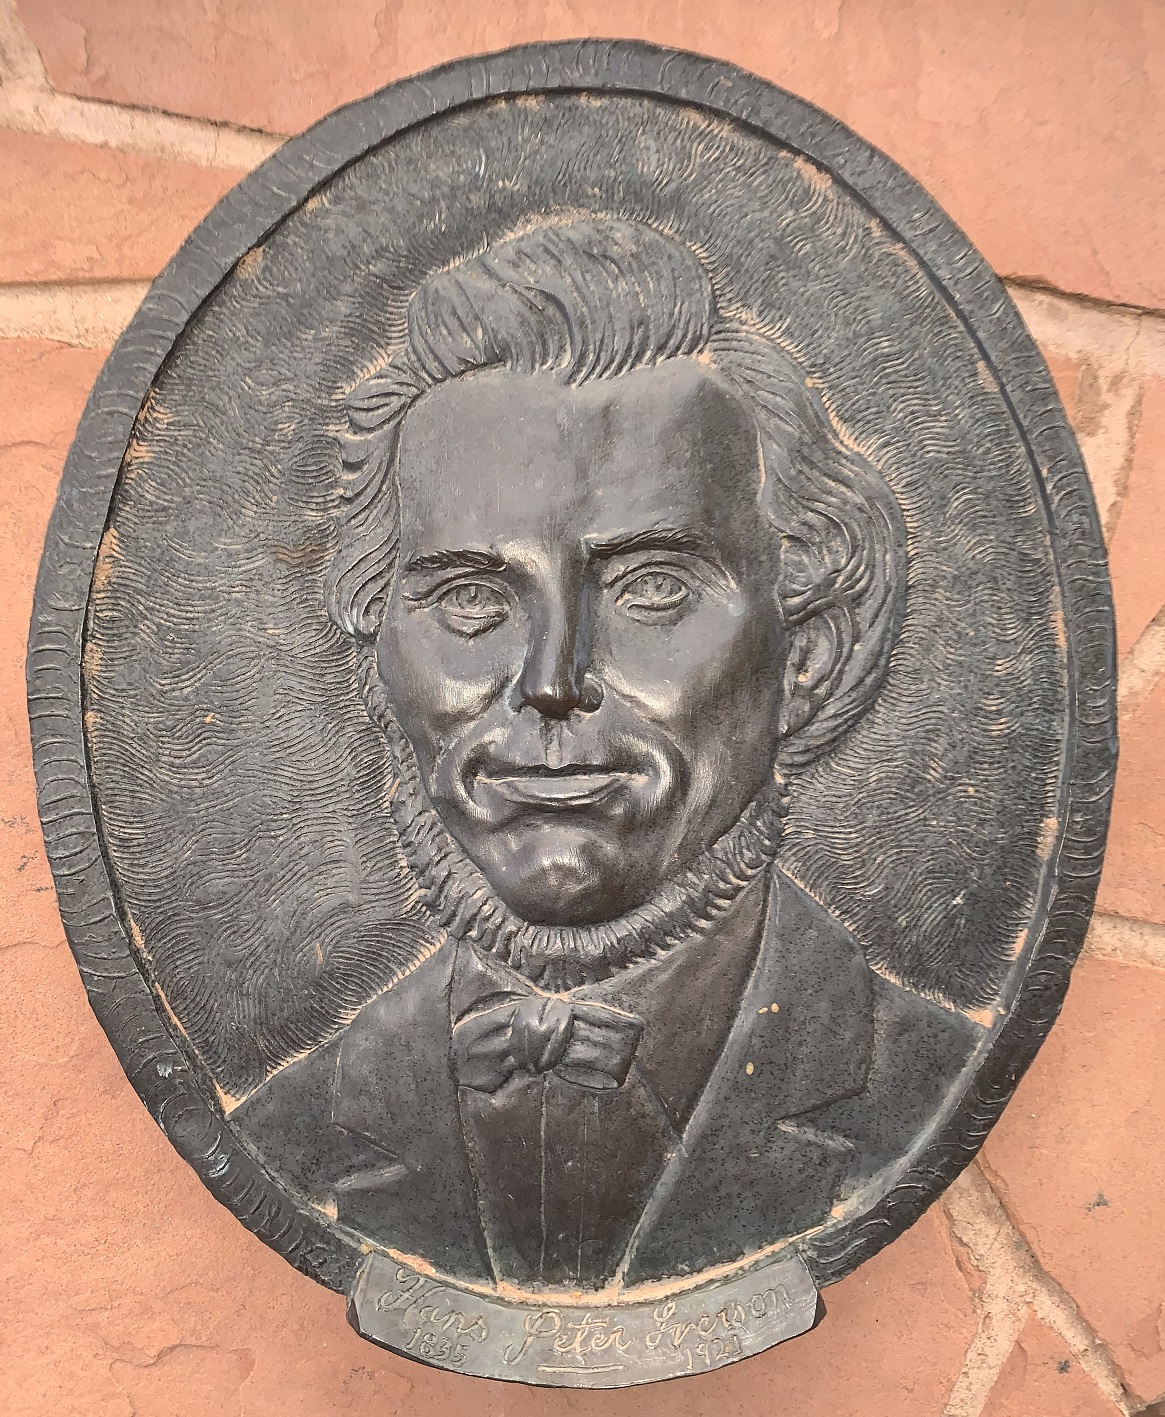 Face plaque of Hans Peter Iverson at the Monument Plaza in Washington, Utah